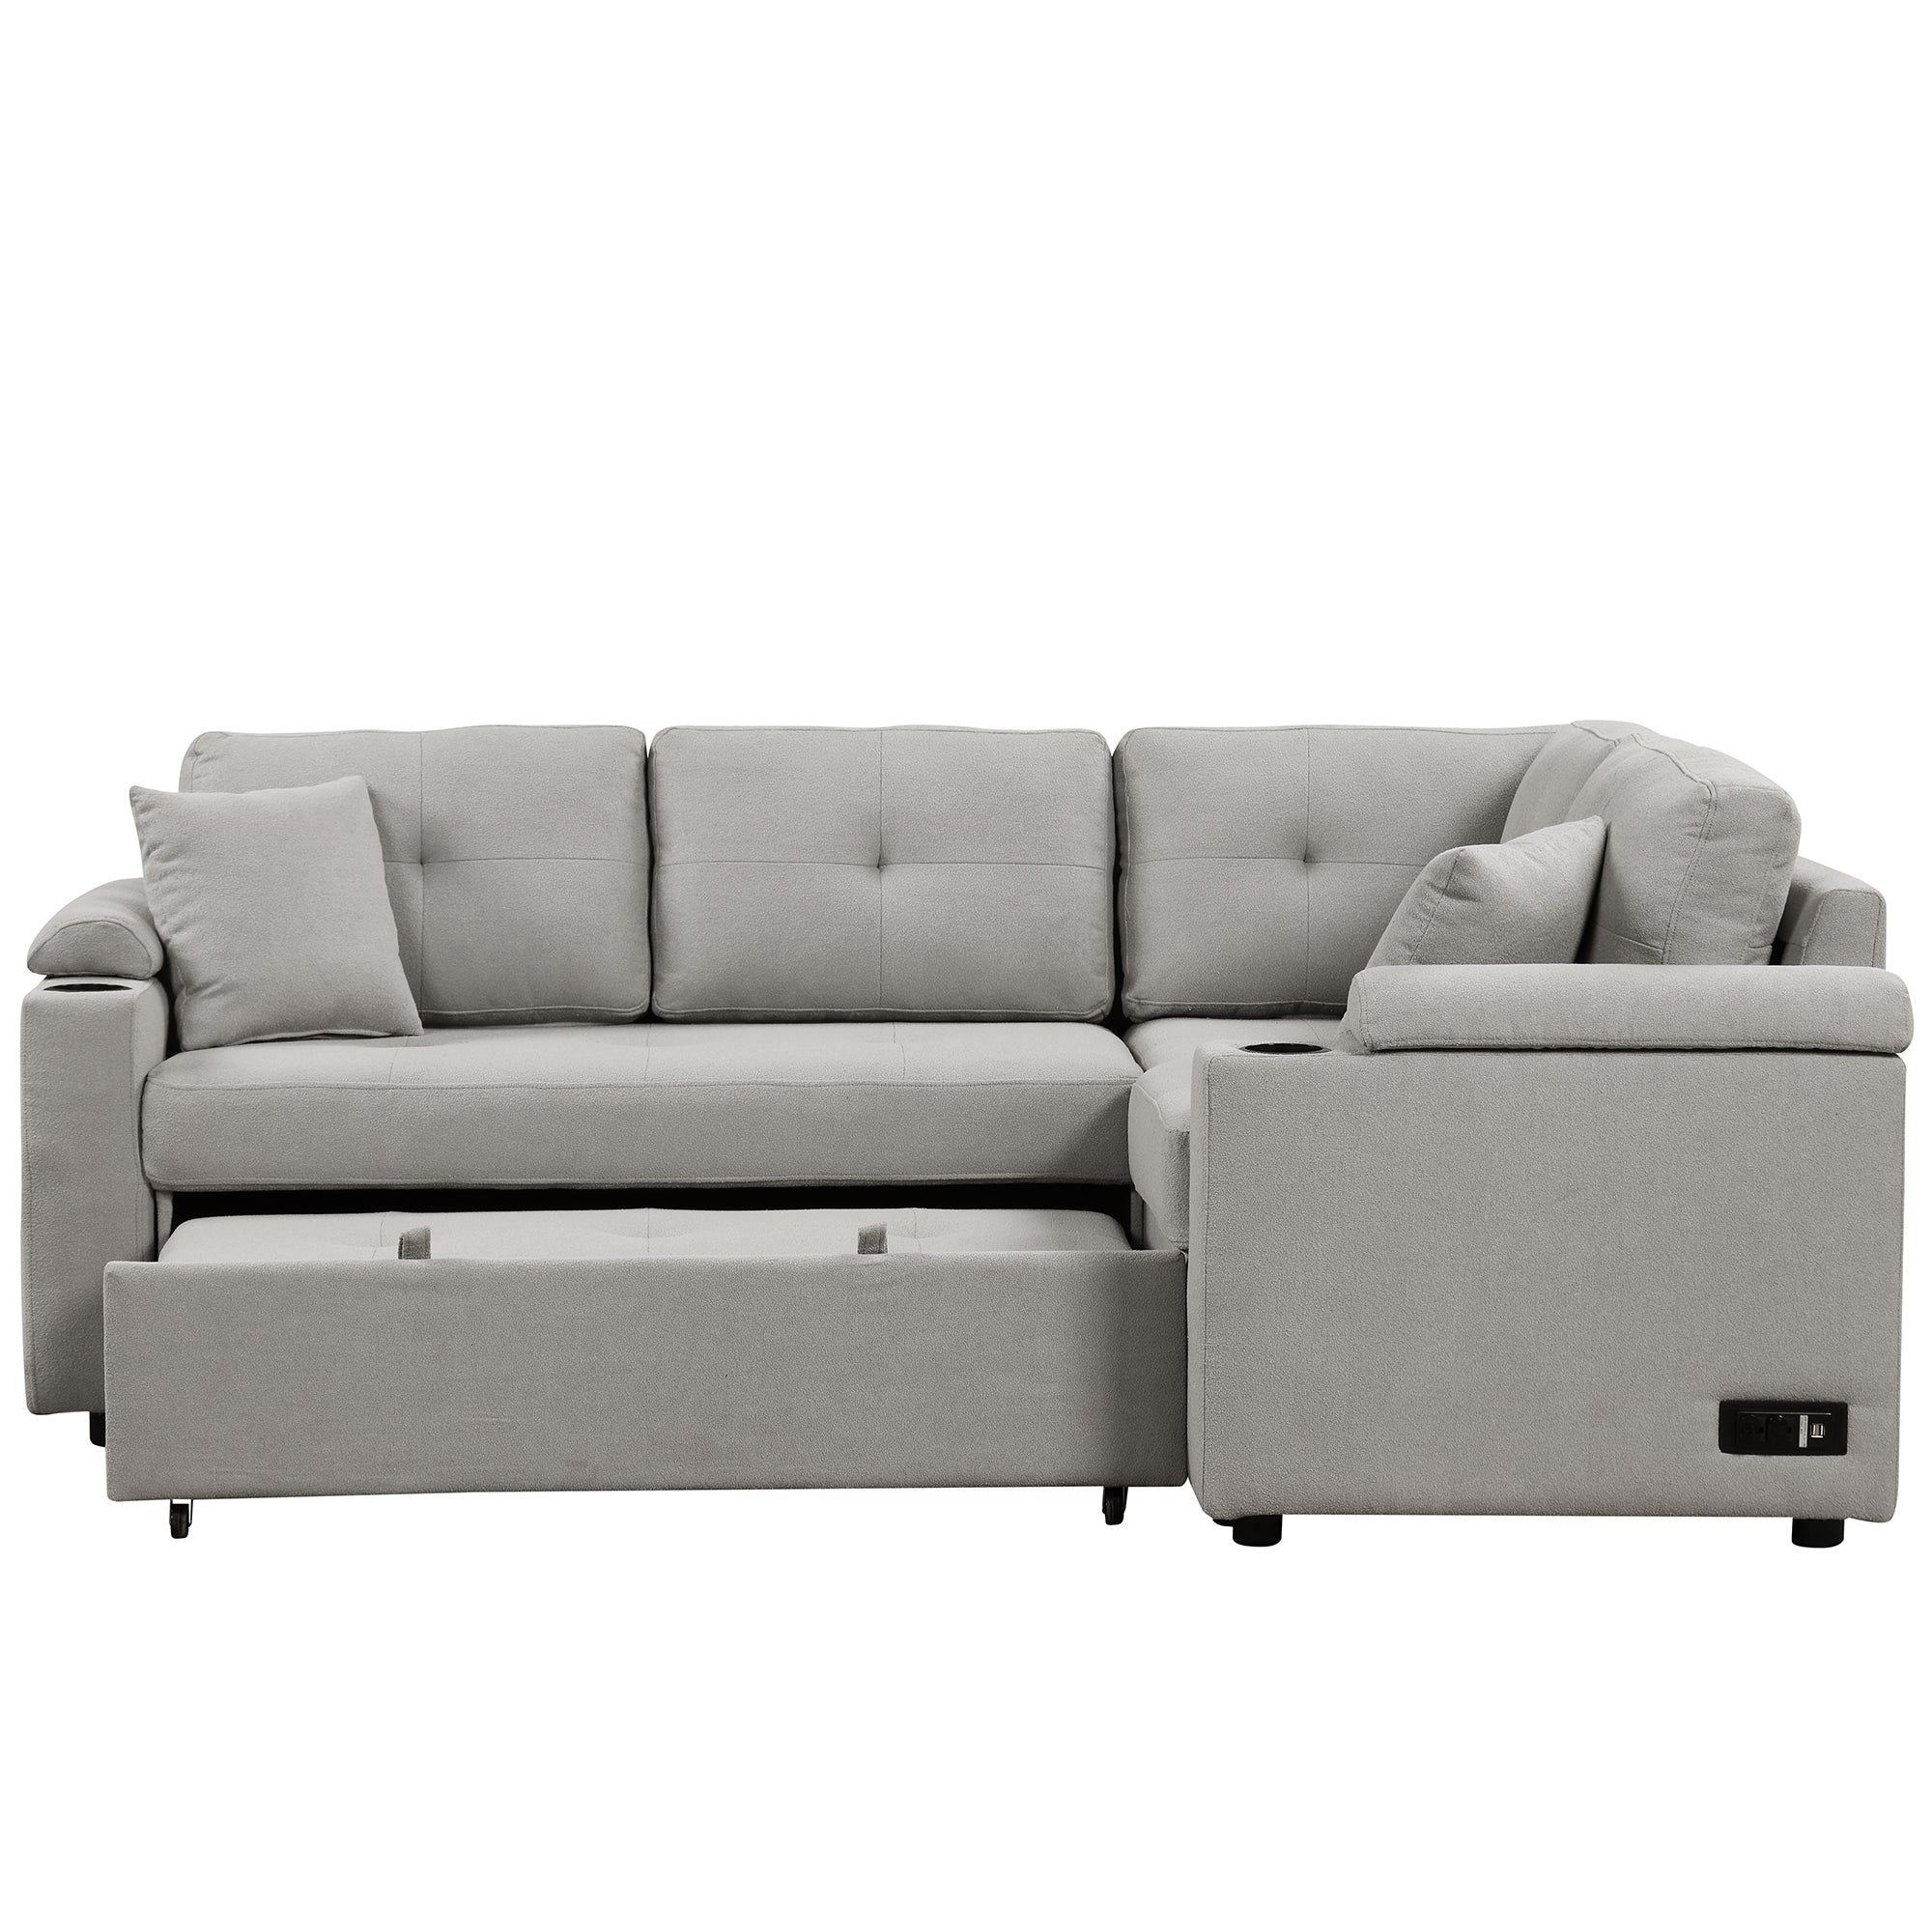 L-Shaped Boucle Sleeper Sectional Sofa - Grey with USB Ports-Sleeper Sectionals-American Furniture Outlet